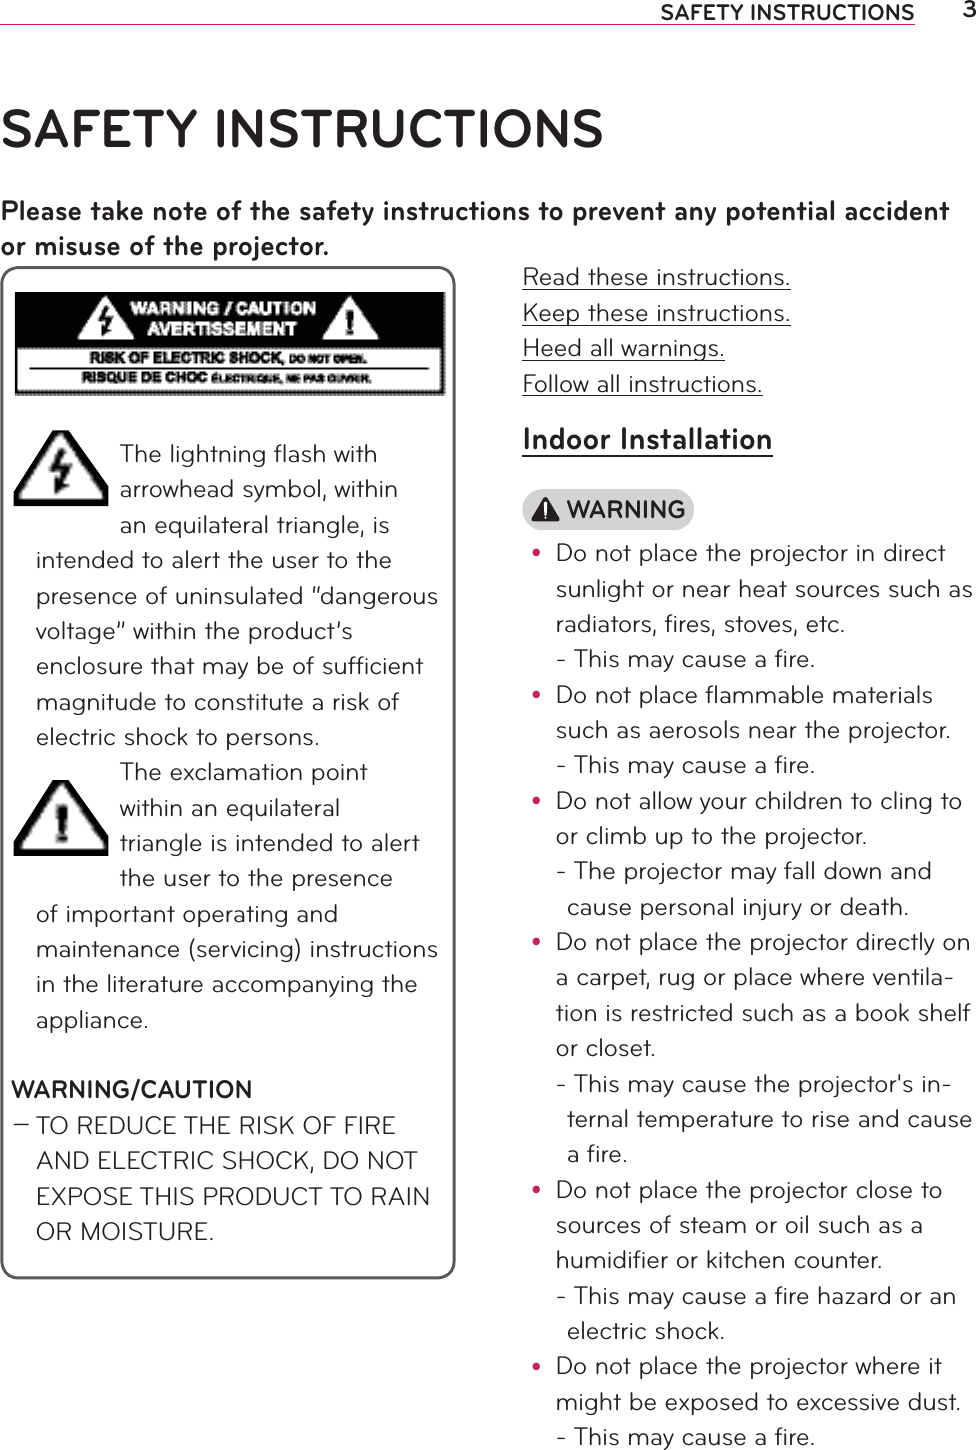 3SAFETY INSTRUCTIONSRead these instructions.Keep these instructions.Heed all warnings.Follow all instructions.Indoor Installation WARNINGy Do not place the projector in direct sunlight or near heat sources such as radiators, fires, stoves, etc. - This may cause a fire.y Do not place flammable materials such as aerosols near the projector. - This may cause a fire.y Do not allow your children to cling to or climb up to the projector. -  The projector may fall down and cause personal injury or death.y Do not place the projector directly on a carpet, rug or place where ventila-tion is restricted such as a book shelf or closet. -  This may cause the projector&apos;s in-ternal temperature to rise and cause a fire.y Do not place the projector close to sources of steam or oil such as a humidifier or kitchen counter. -  This may cause a fire hazard or an electric shock.y Do not place the projector where it might be exposed to excessive dust. -  This may cause a fire.SAFETY INSTRUCTIONSPlease take note of the safety instructions to prevent any potential accident or misuse of the projector.The lightning ﬂash with arrowhead symbol, within an equilateral triangle, is intended to alert the user to the presence of uninsulated “dangerous voltage” within the product’s enclosure that may be of sufﬁcient magnitude to constitute a risk of electric shock to persons.The exclamation point within an equilateral triangle is intended to alert the user to the presence of important operating and maintenance (servicing) instructions in the literature accompanying the appliance.WARNING/CAUTION0 TO REDUCE THE RISK OF FIRE AND ELECTRIC SHOCK, DO NOT EXPOSE THIS PRODUCT TO RAIN OR MOISTURE.